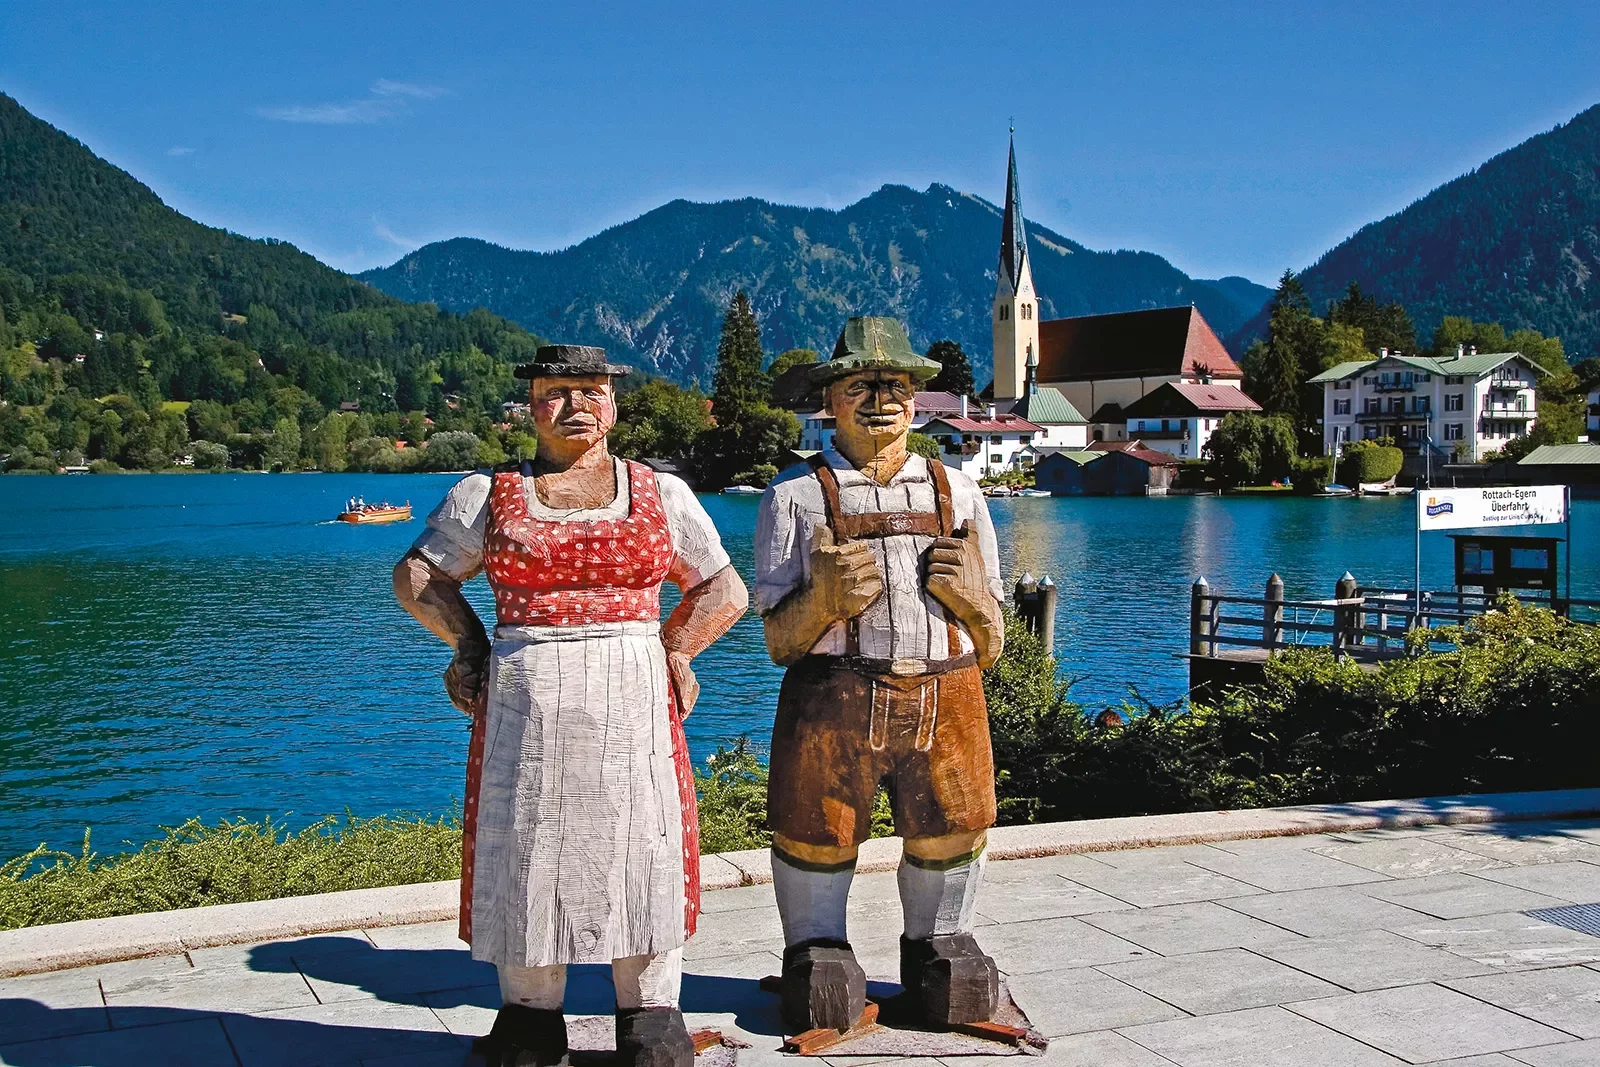 Two chiseled wooden statues in German dress.